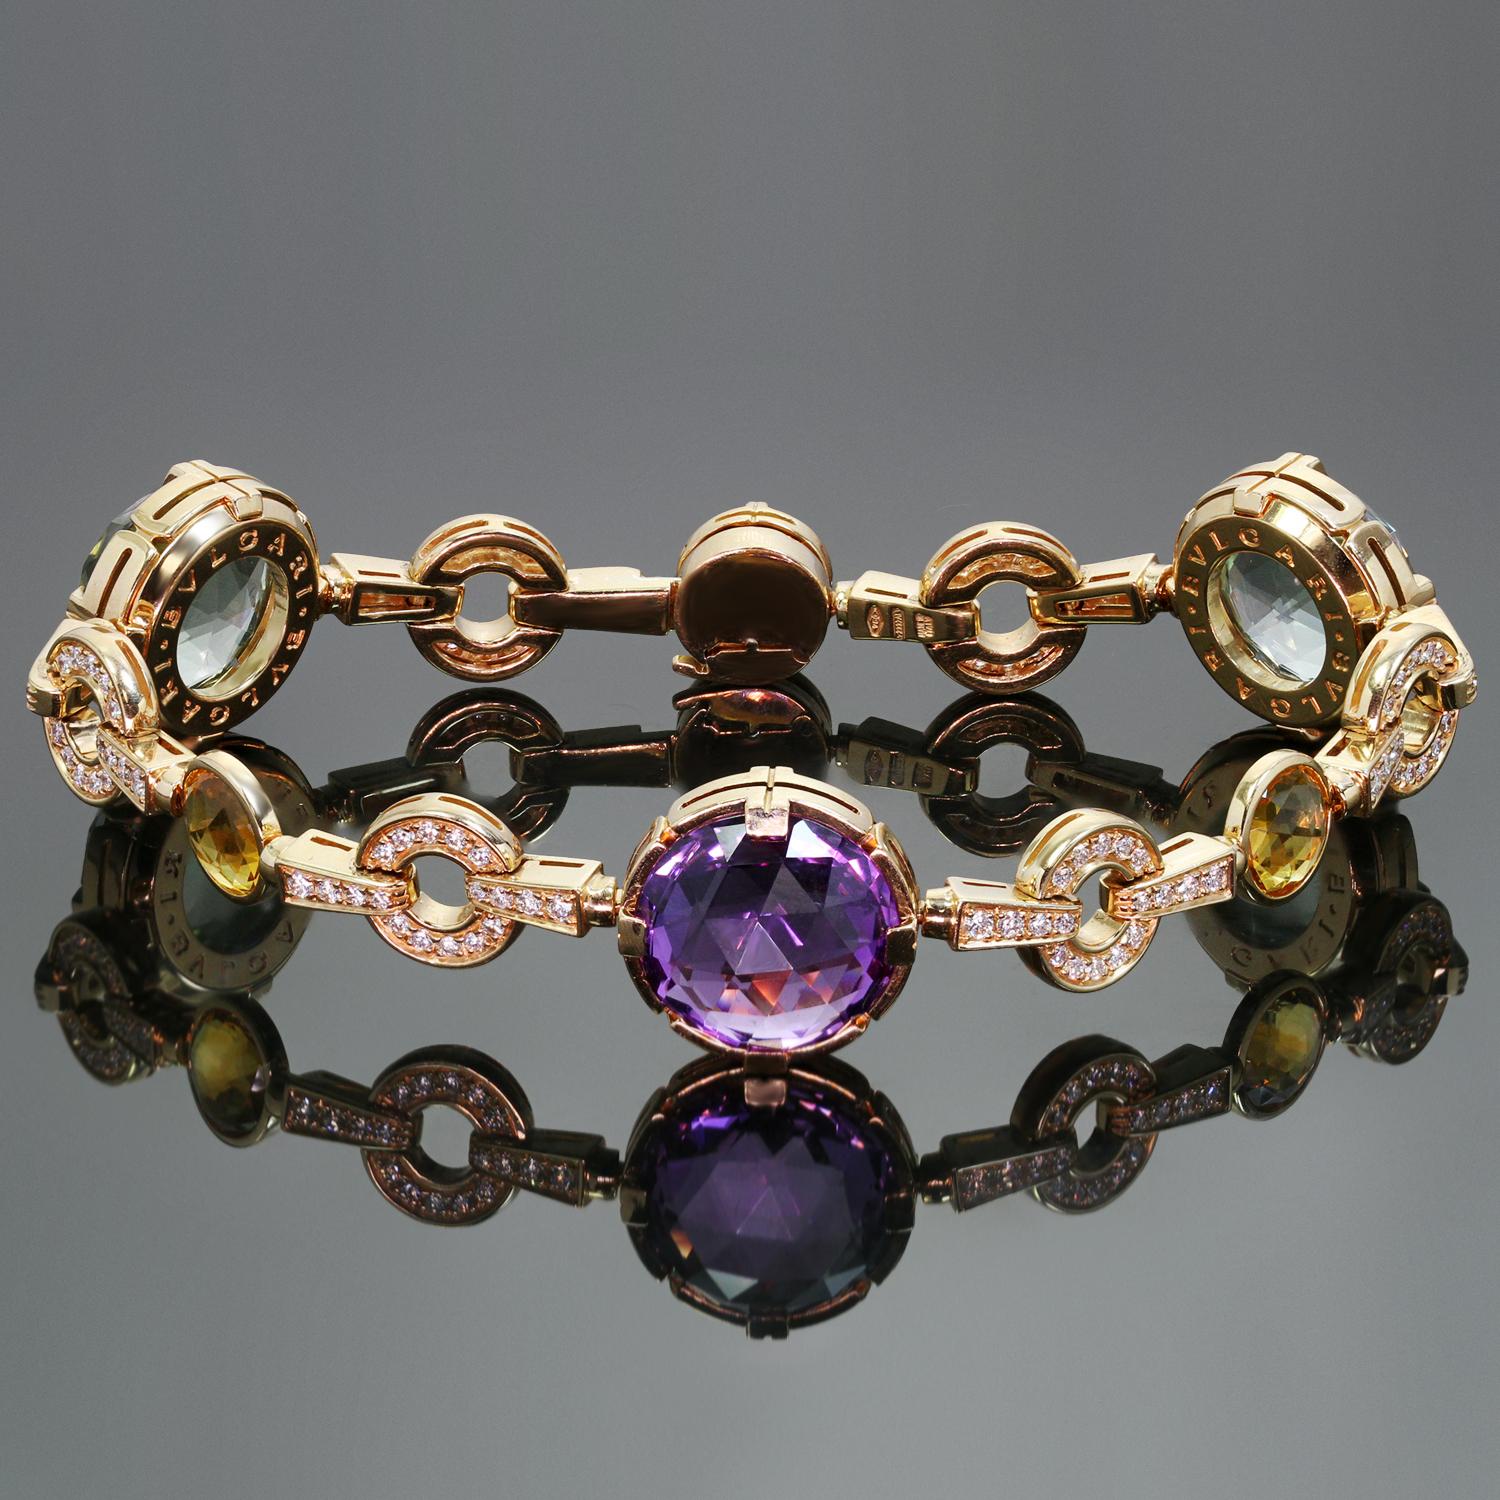 This gorgeous cocktail bracelet from Bvlgari's vibrant Parentesi collection is crafted in 18k rose gold and set with a faceted round-shaped amethyst measuring 13.0mm x 13.05mm x 7.77mm, flanked by a praseolite measuring 13.07mm x 13.10mm x 7.65mm,